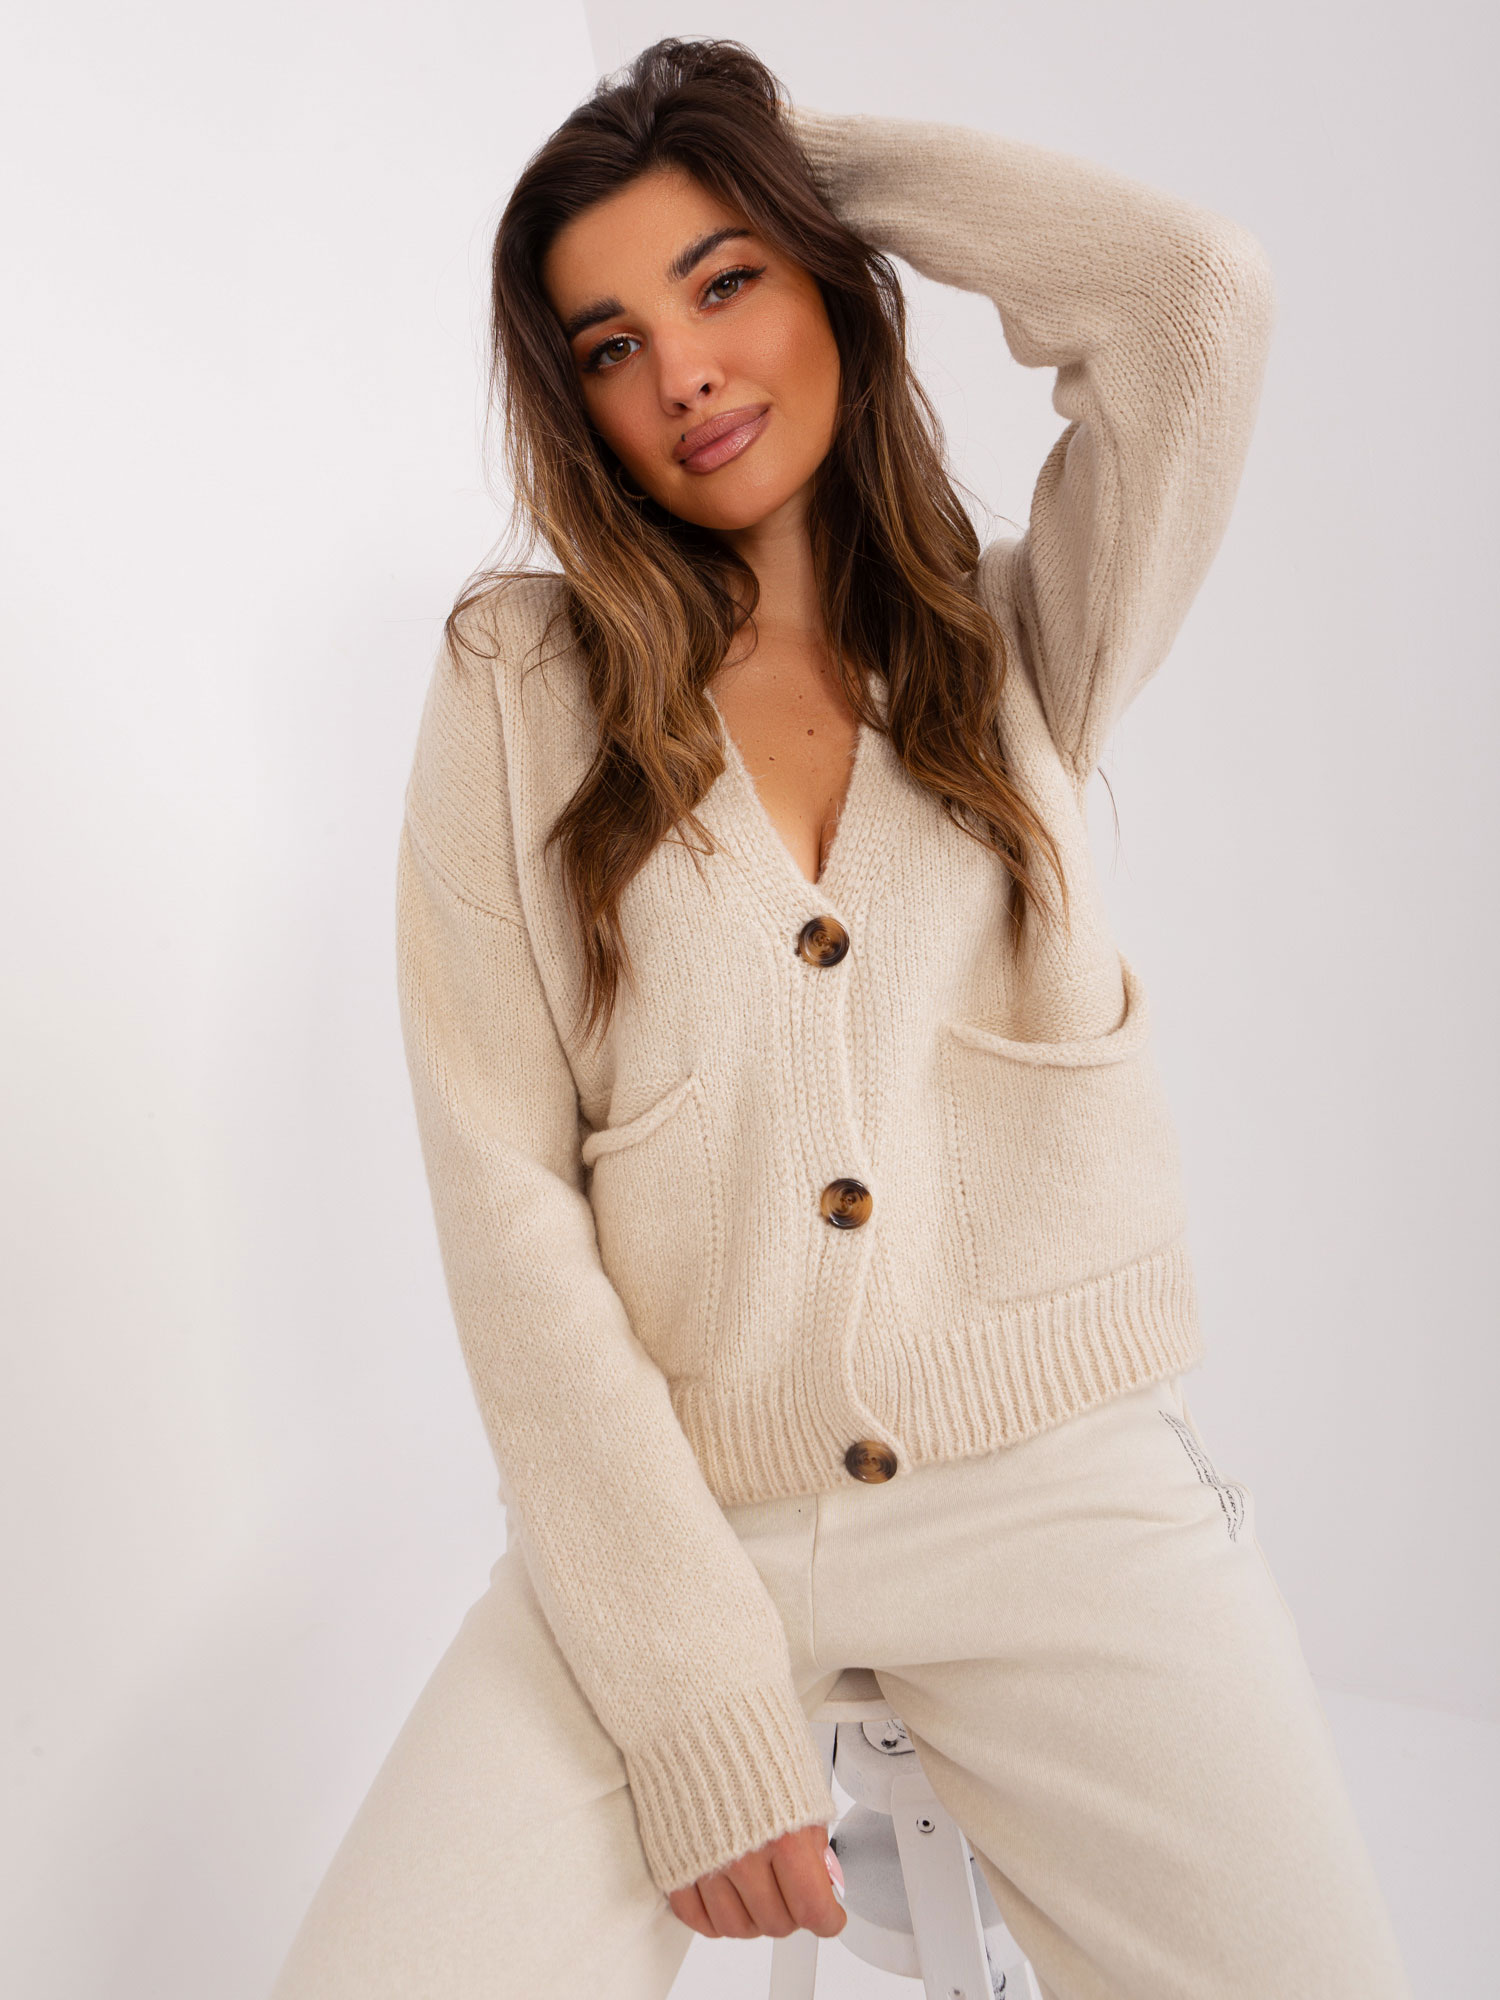 Beige knitted cardigan with a neckline